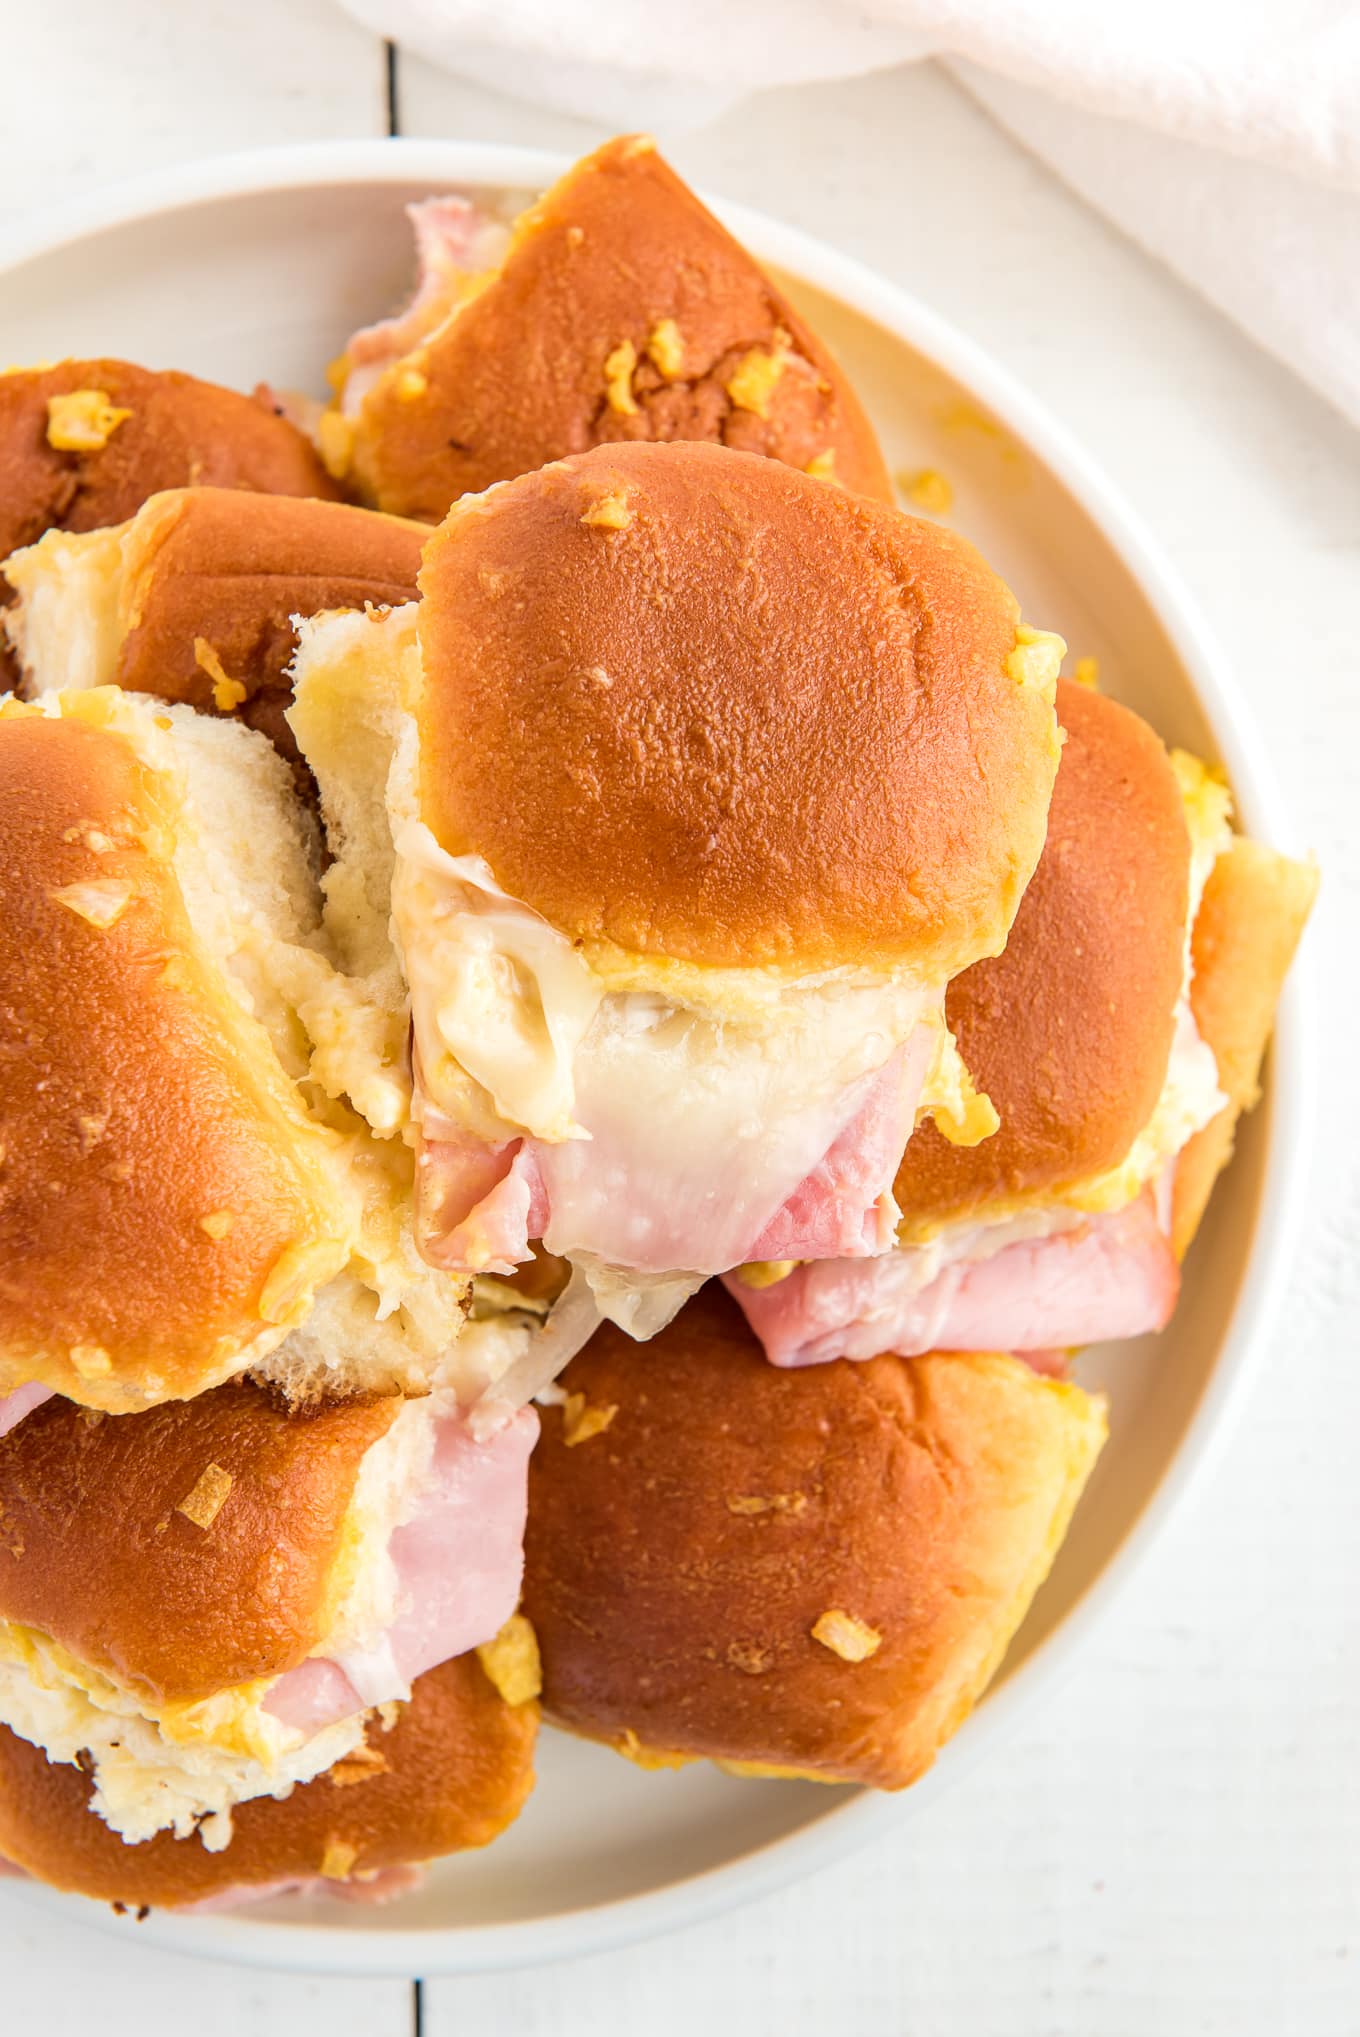 Hawaiian Rolls Sliders with ham and Swiss cheese stacked on a white plate./ Delicious ham and cheese sliders on soft and sweet Hawaiian rolls, stacked with melted cheese, juicy ham, and topped with a golden-brown glaze, perfect for a quick dinner or appetizer. 